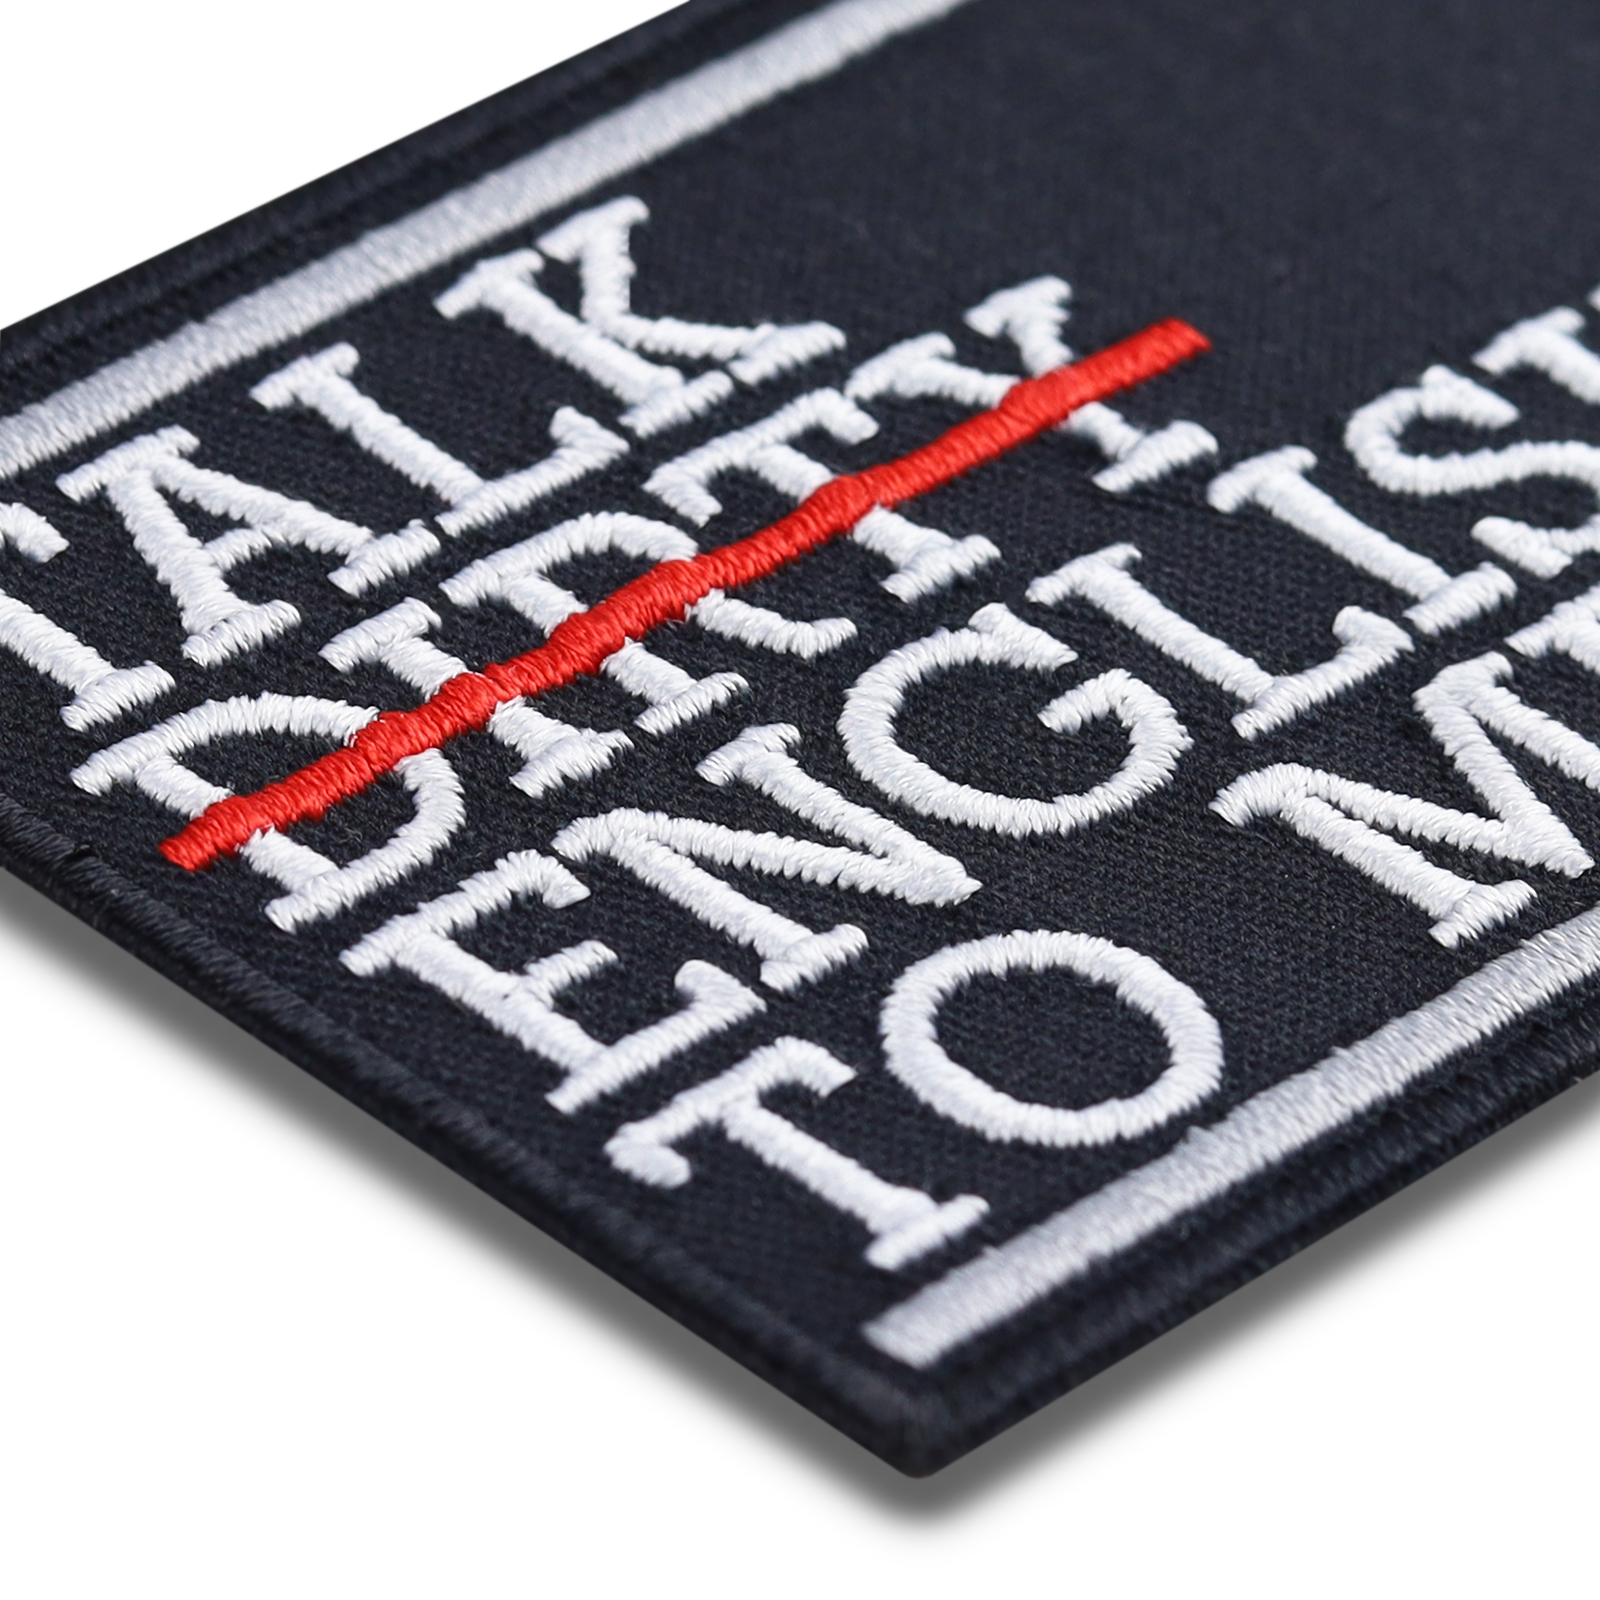 Talk english to me - Patch